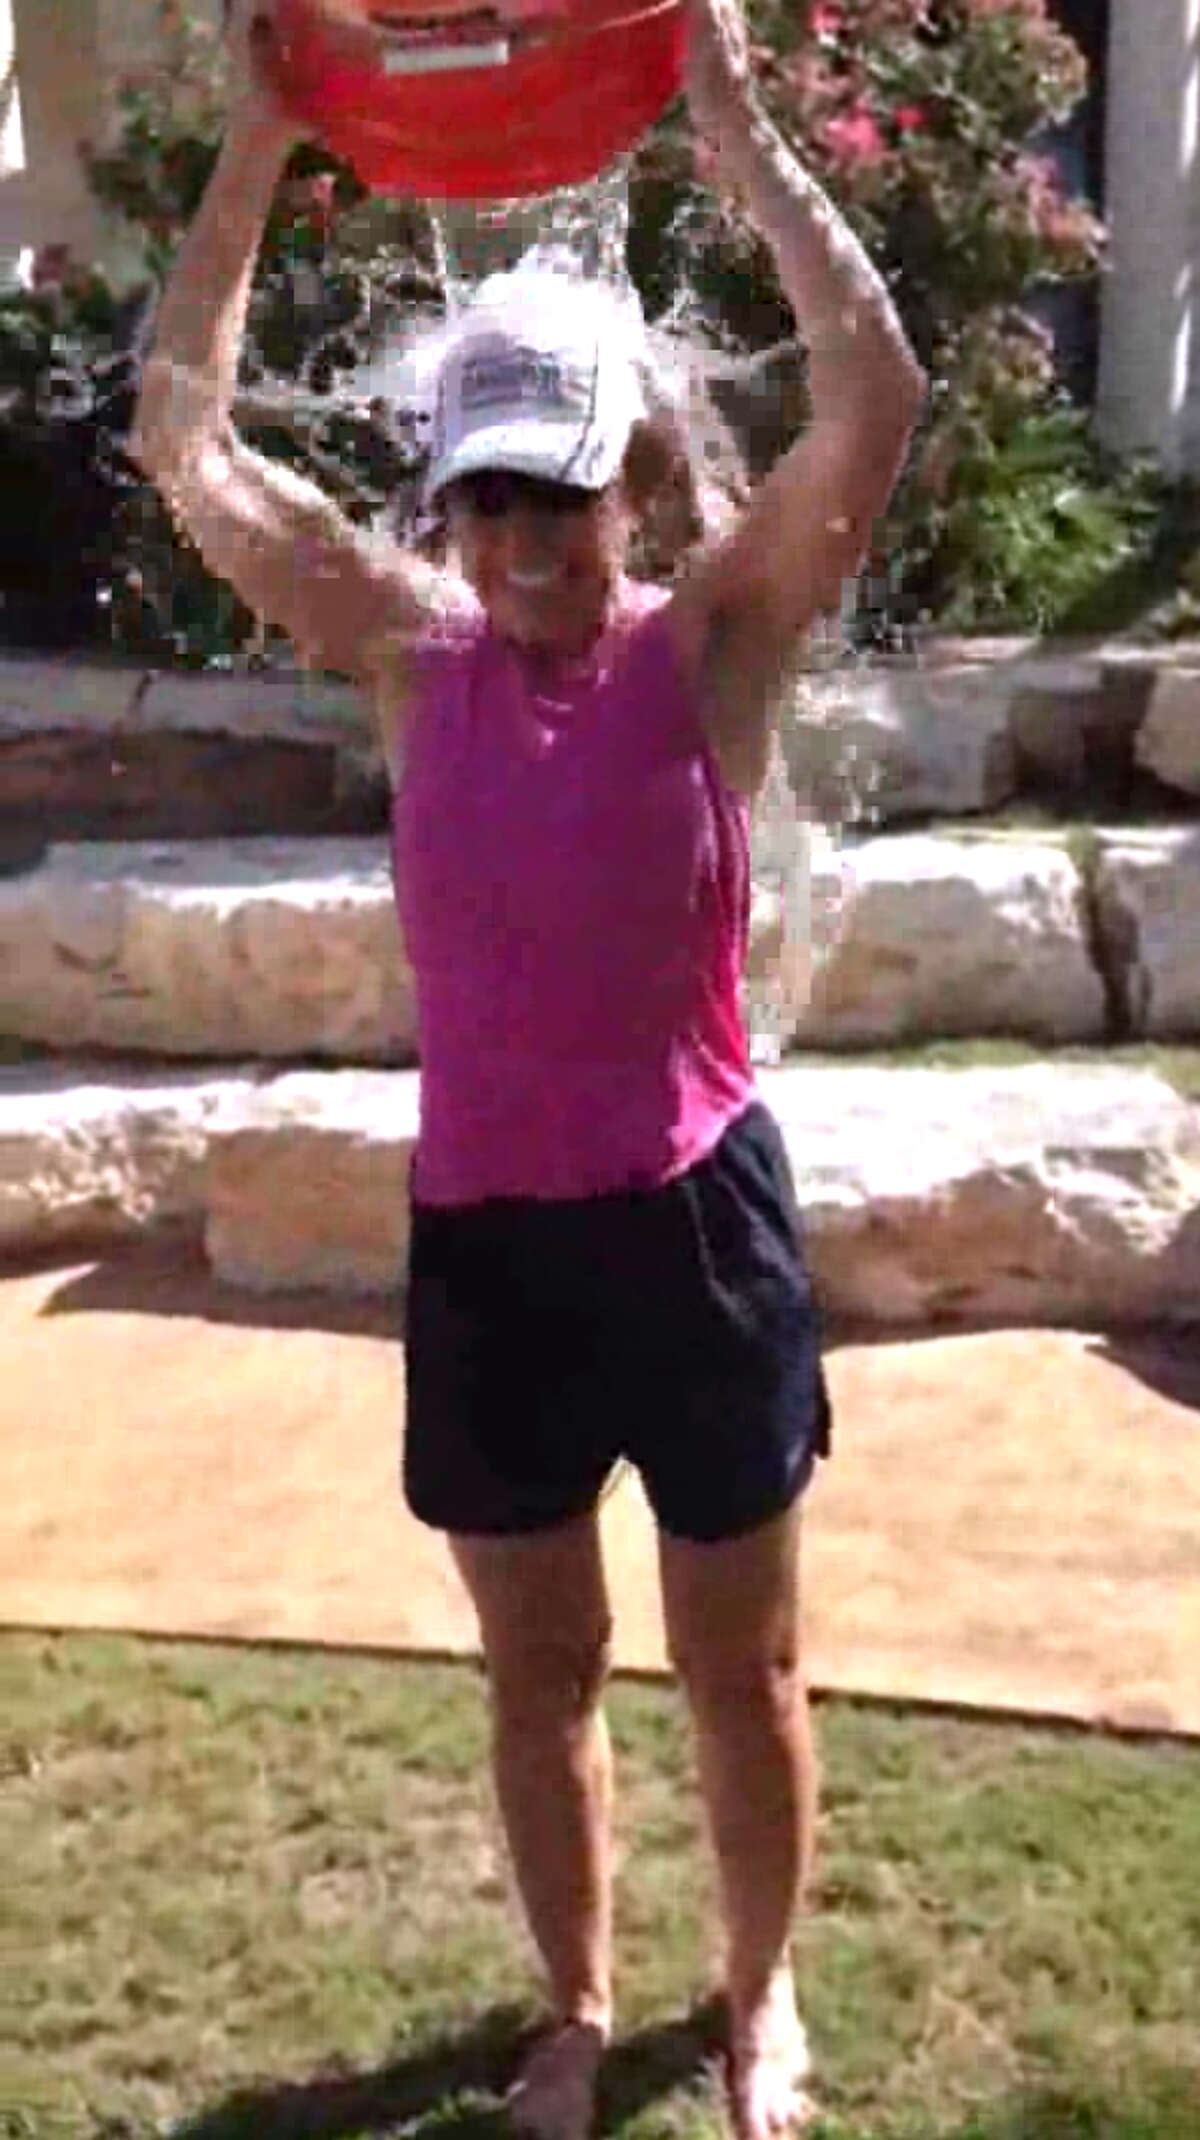 San Antonio City Manager Sheryl Sculley takes the ALS ice bucket challenge, albeit with a minimal amount of water, Saturday morning, Aug. 16, 2014.